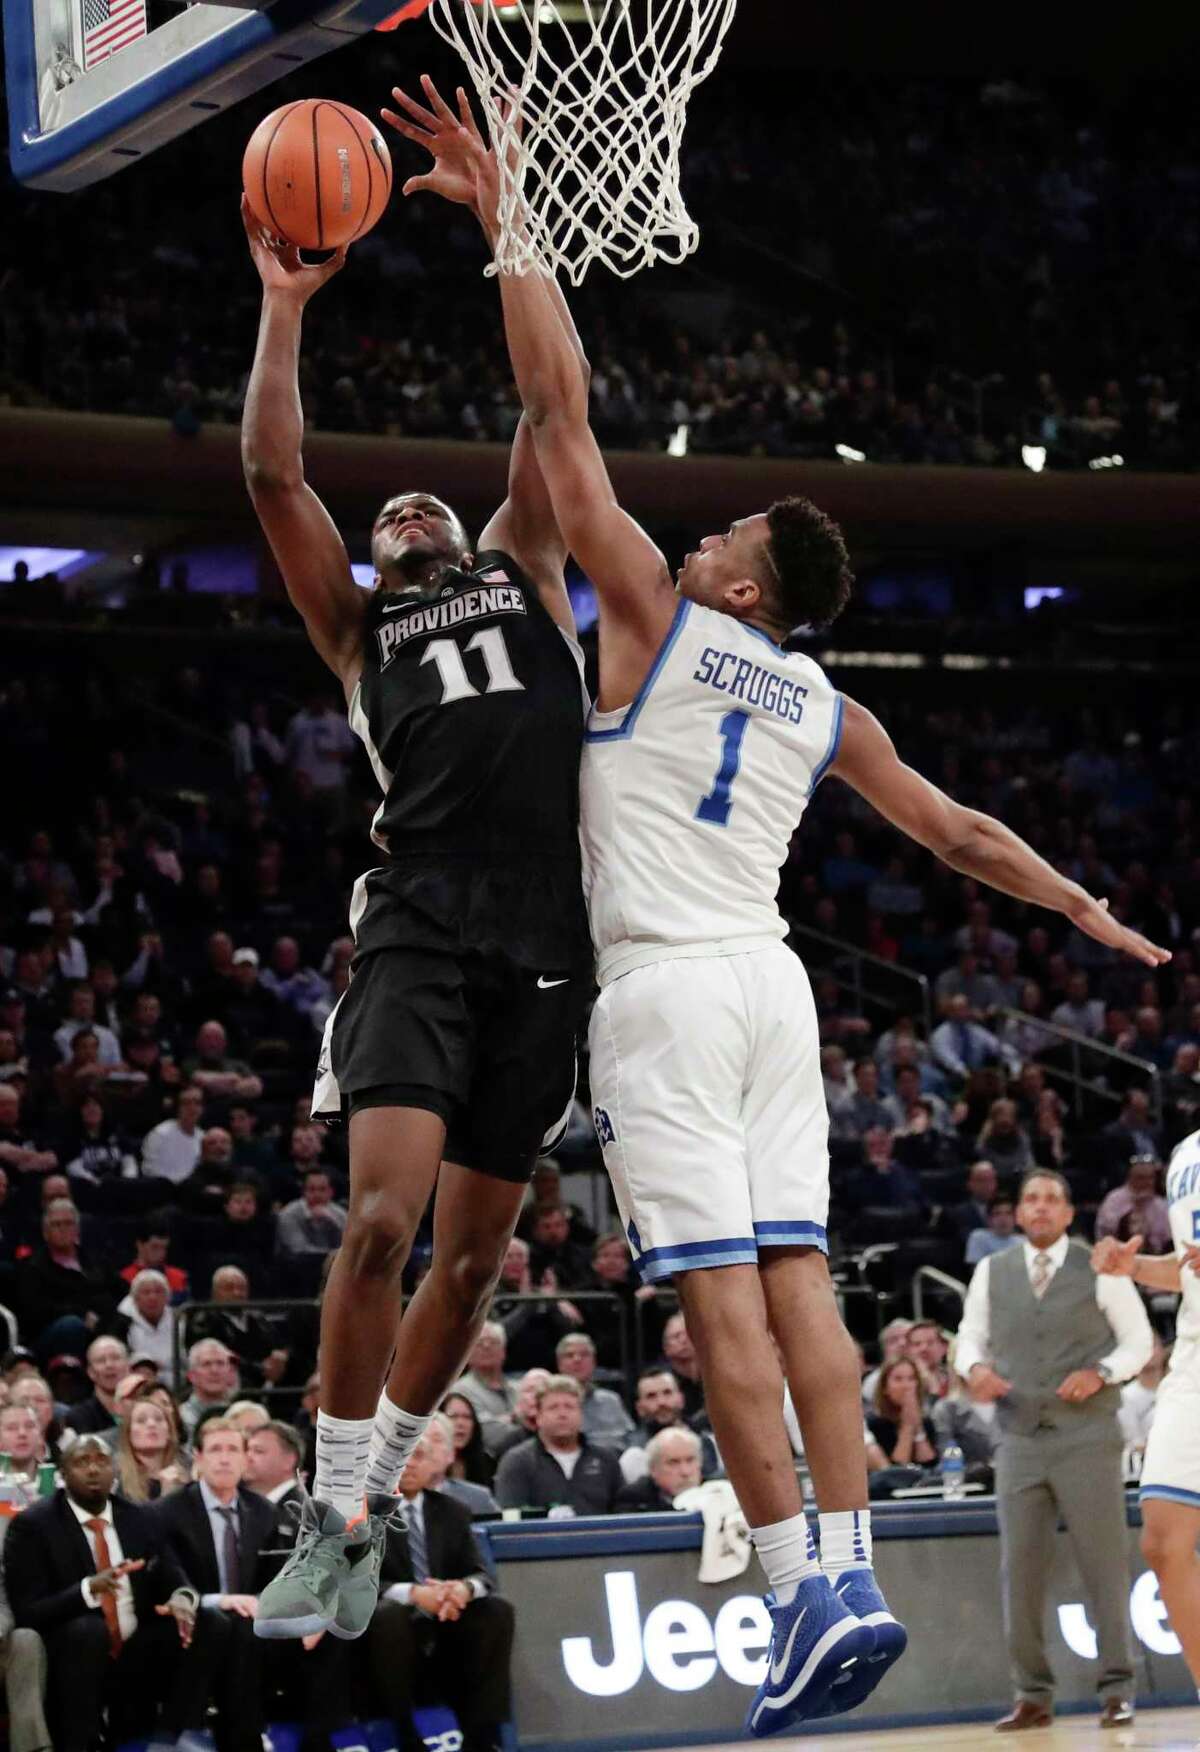 Xavier's Paul Scruggs (1) defends Providence's Alpha Diallo (11) during the second half of an NCAA college basketball game in the Big East men's tournament semifinals Friday, March 9, 2018, in New York. (AP Photo/Frank Franklin II)